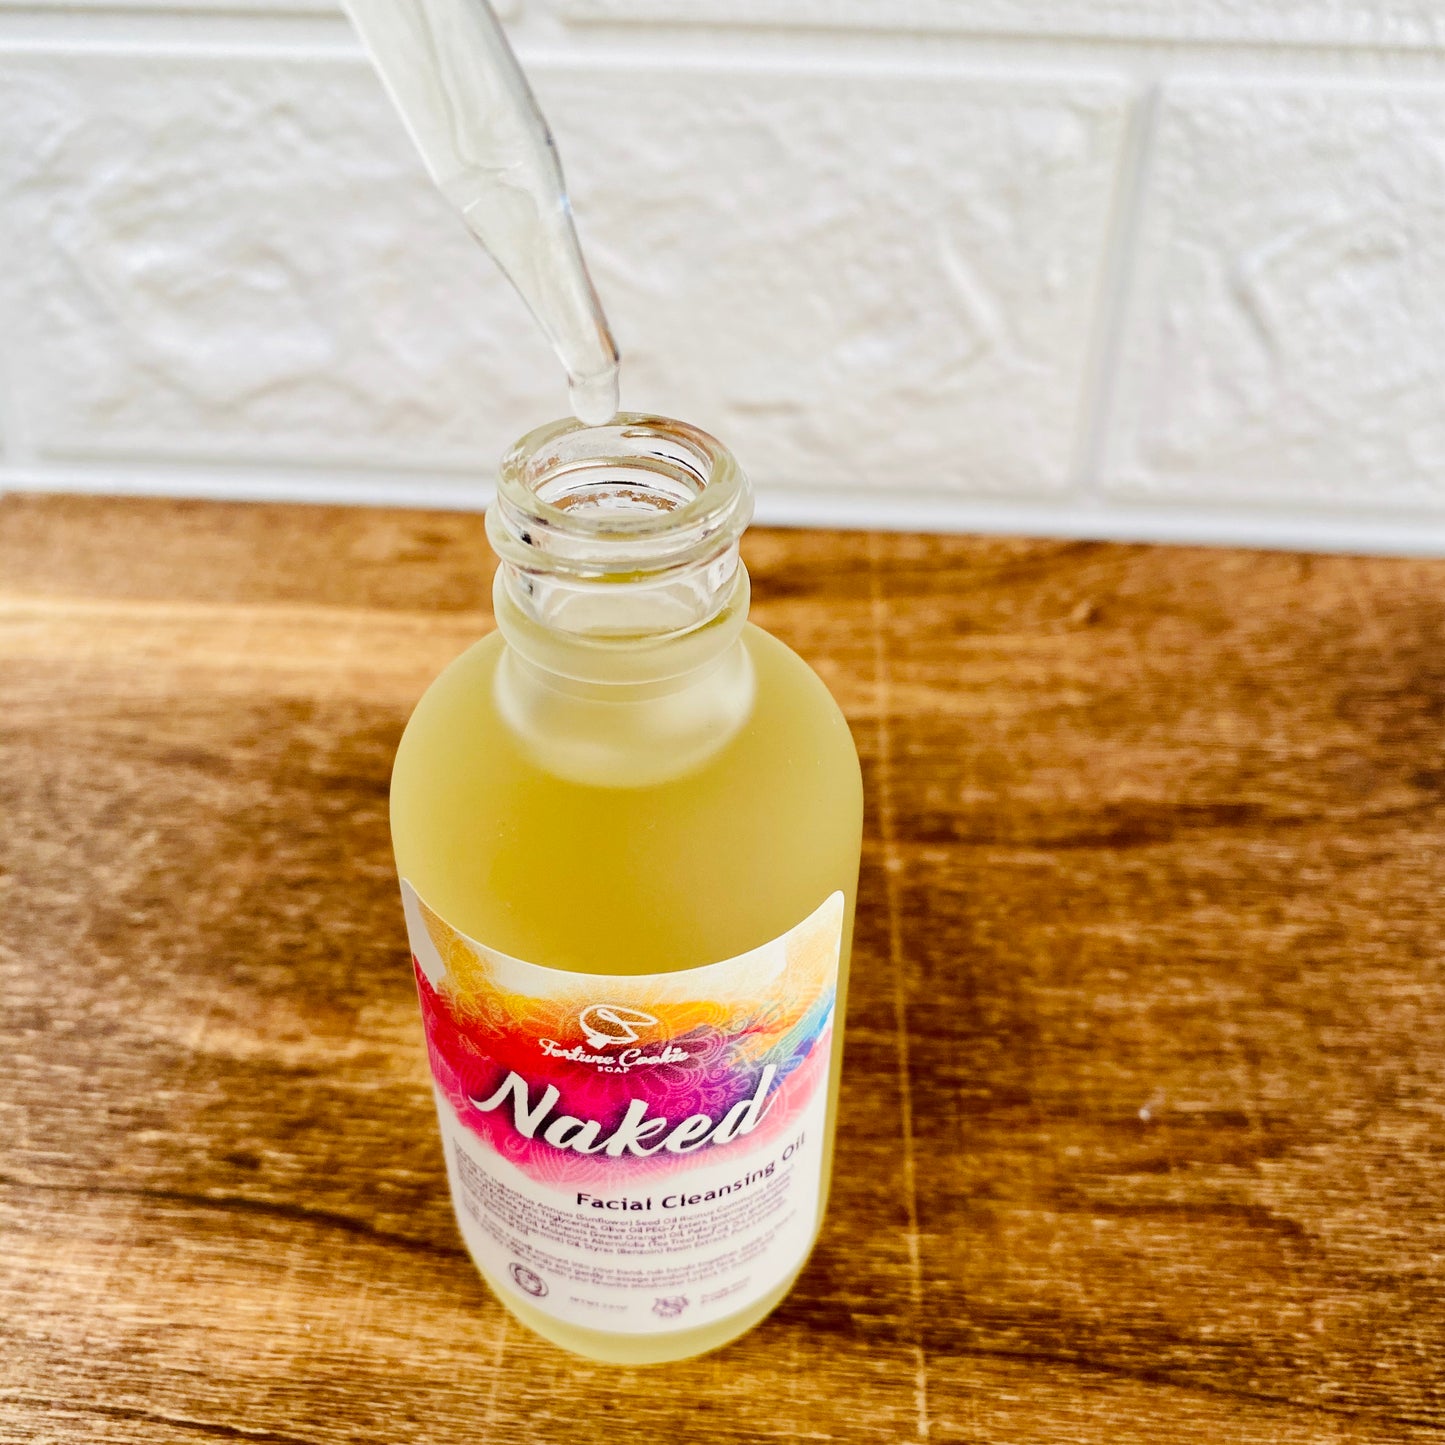 NAKED Facial Cleansing Oil